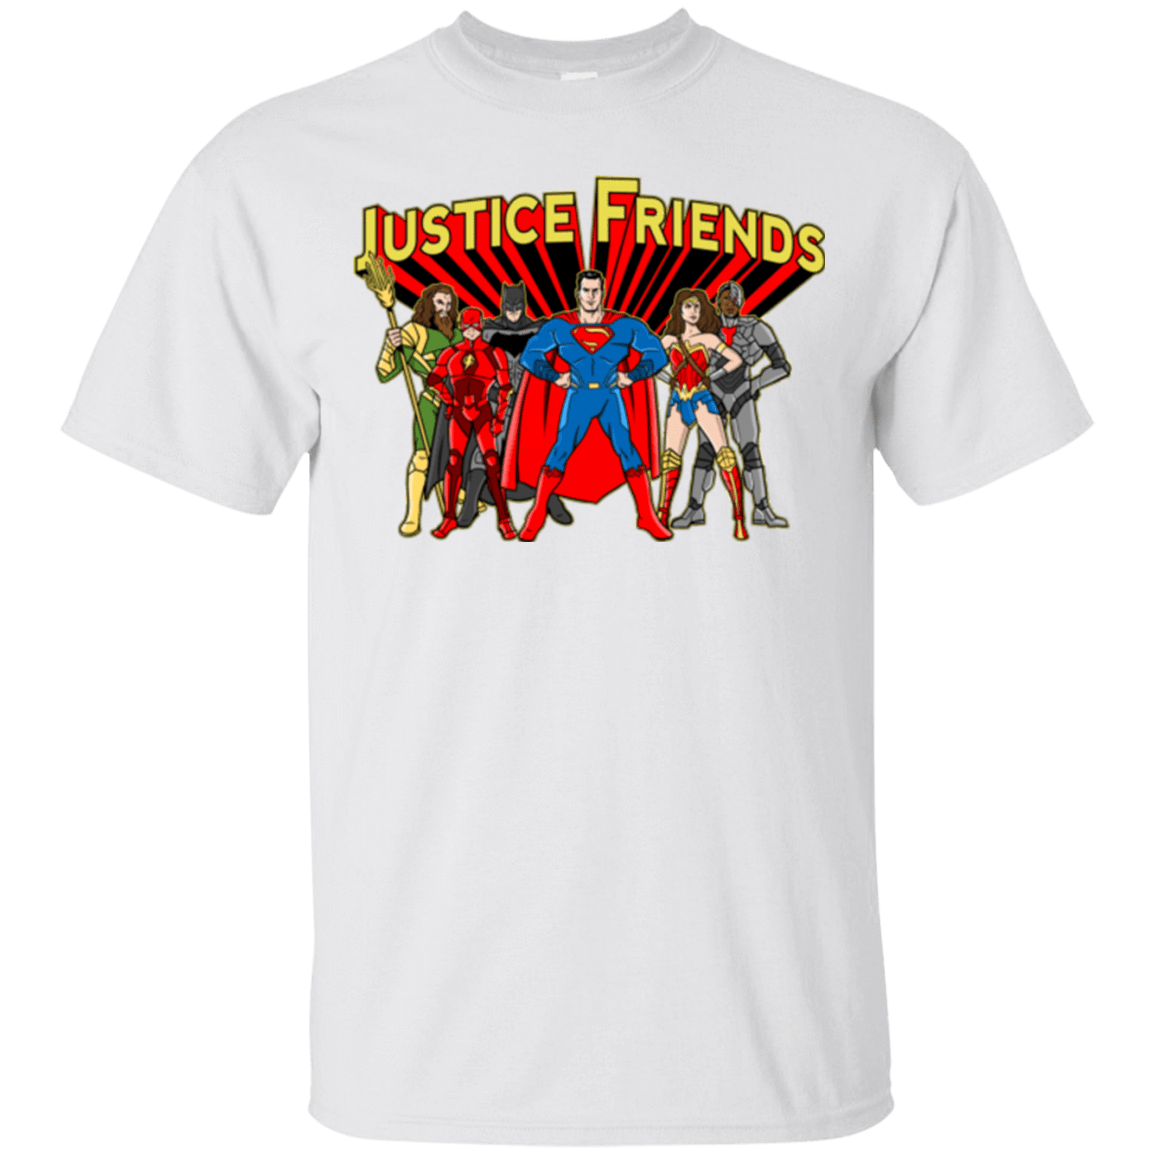 T-Shirts White / Small Justice Friends T-Shirt